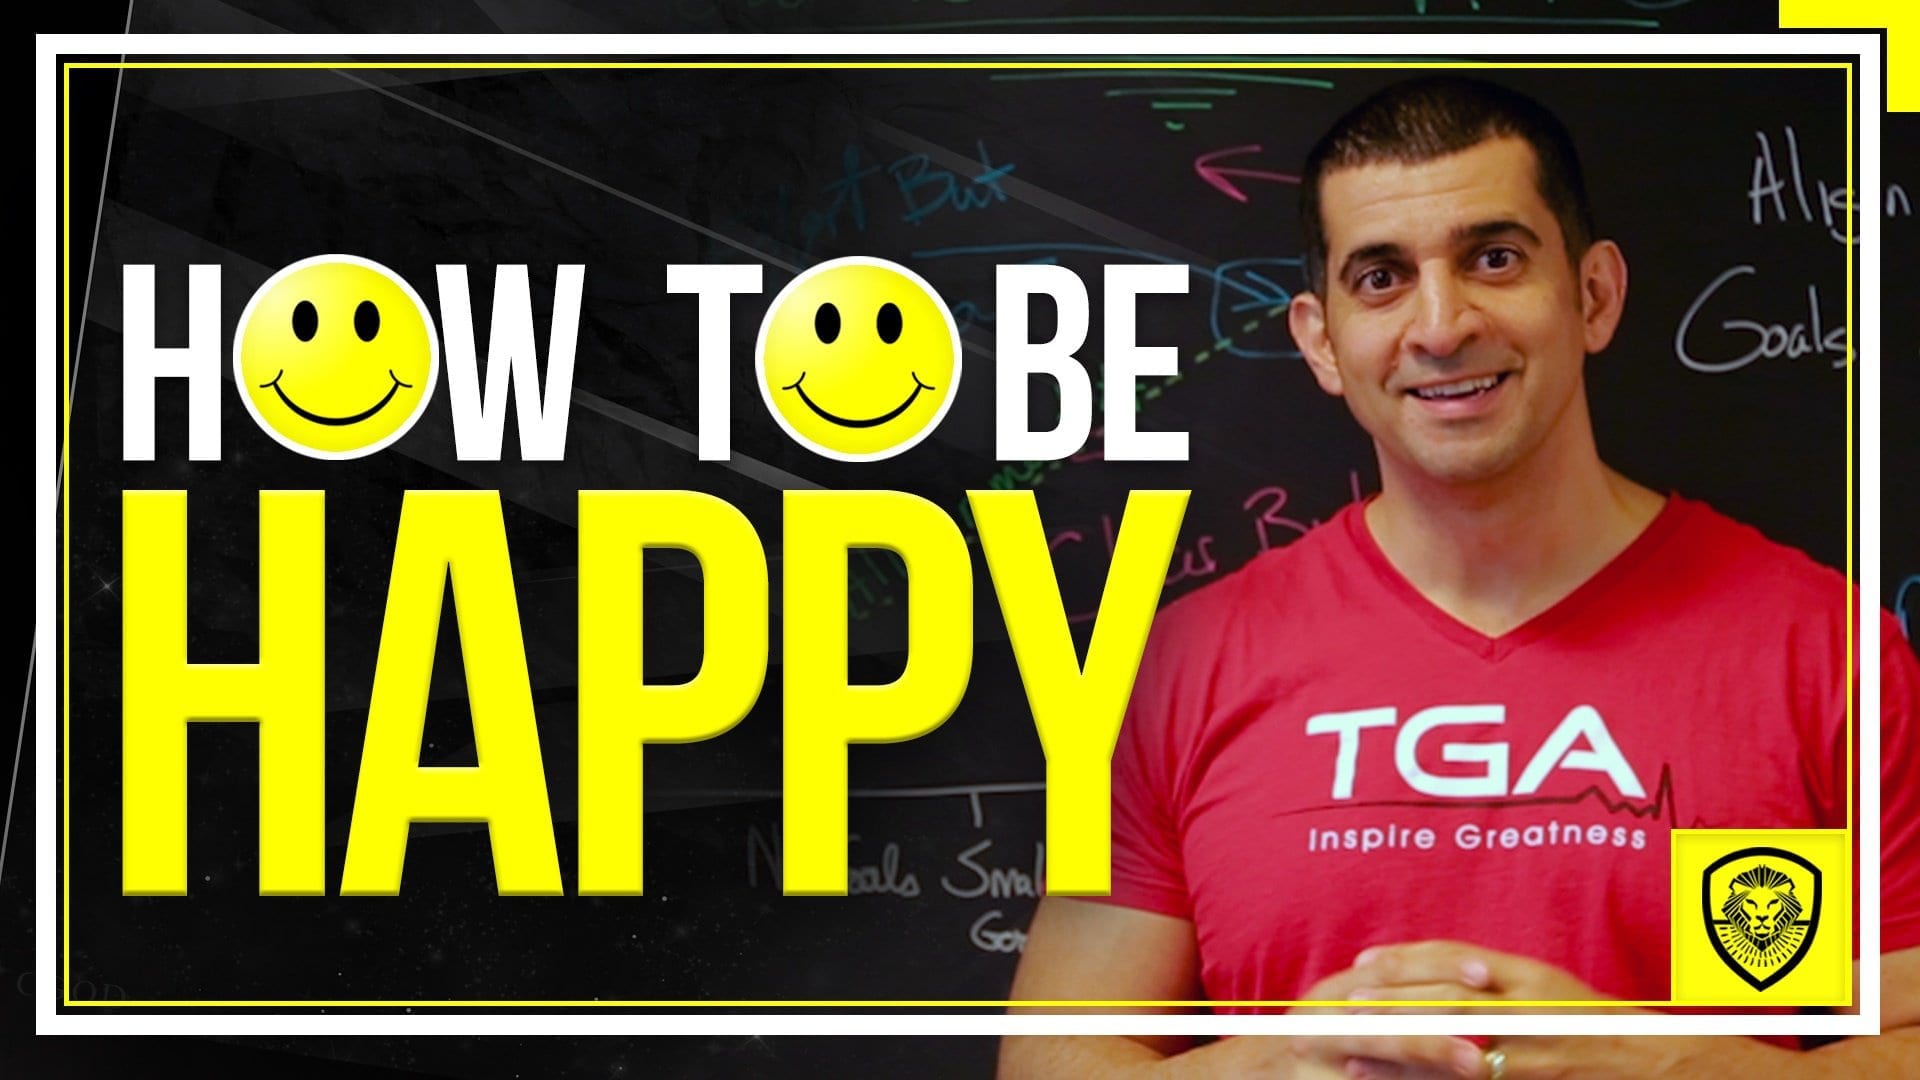 How to be happy as an entrepreneur